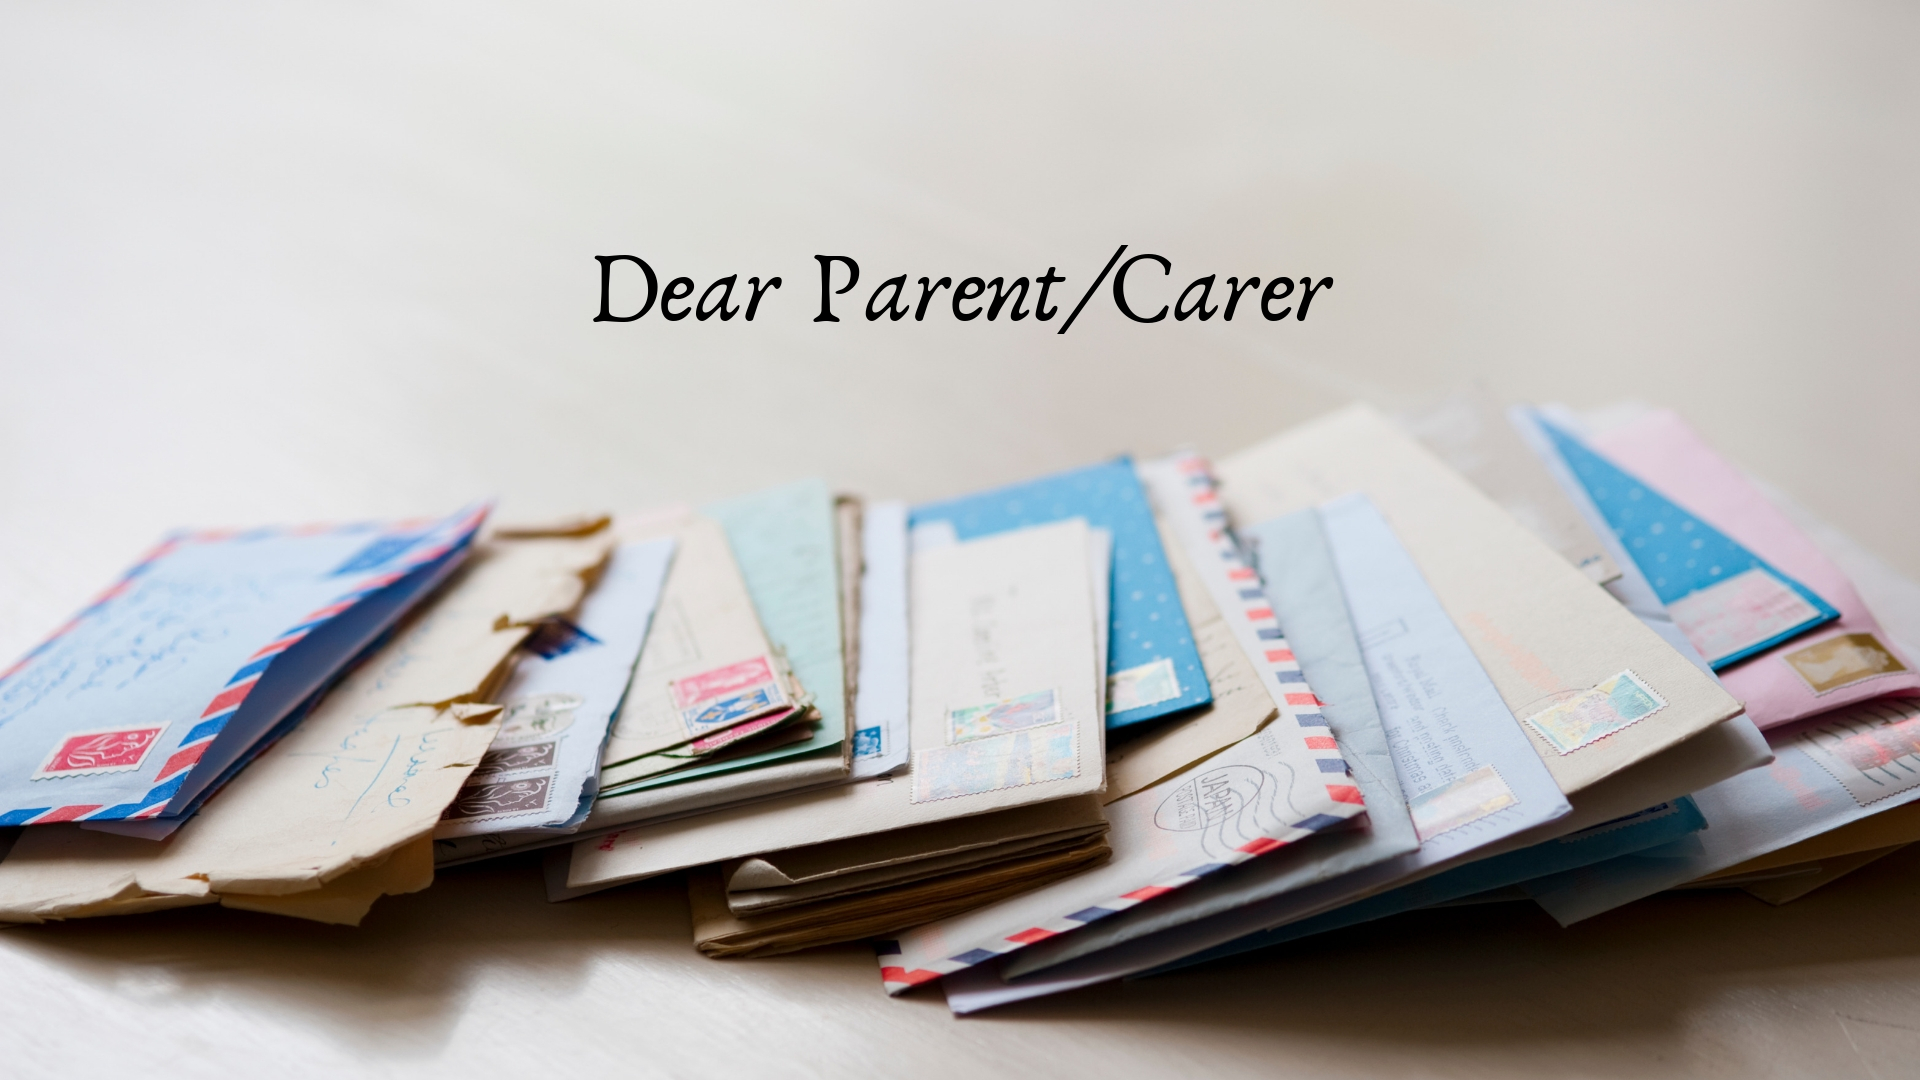 Covid-19 Absence: Guide for parents/carers